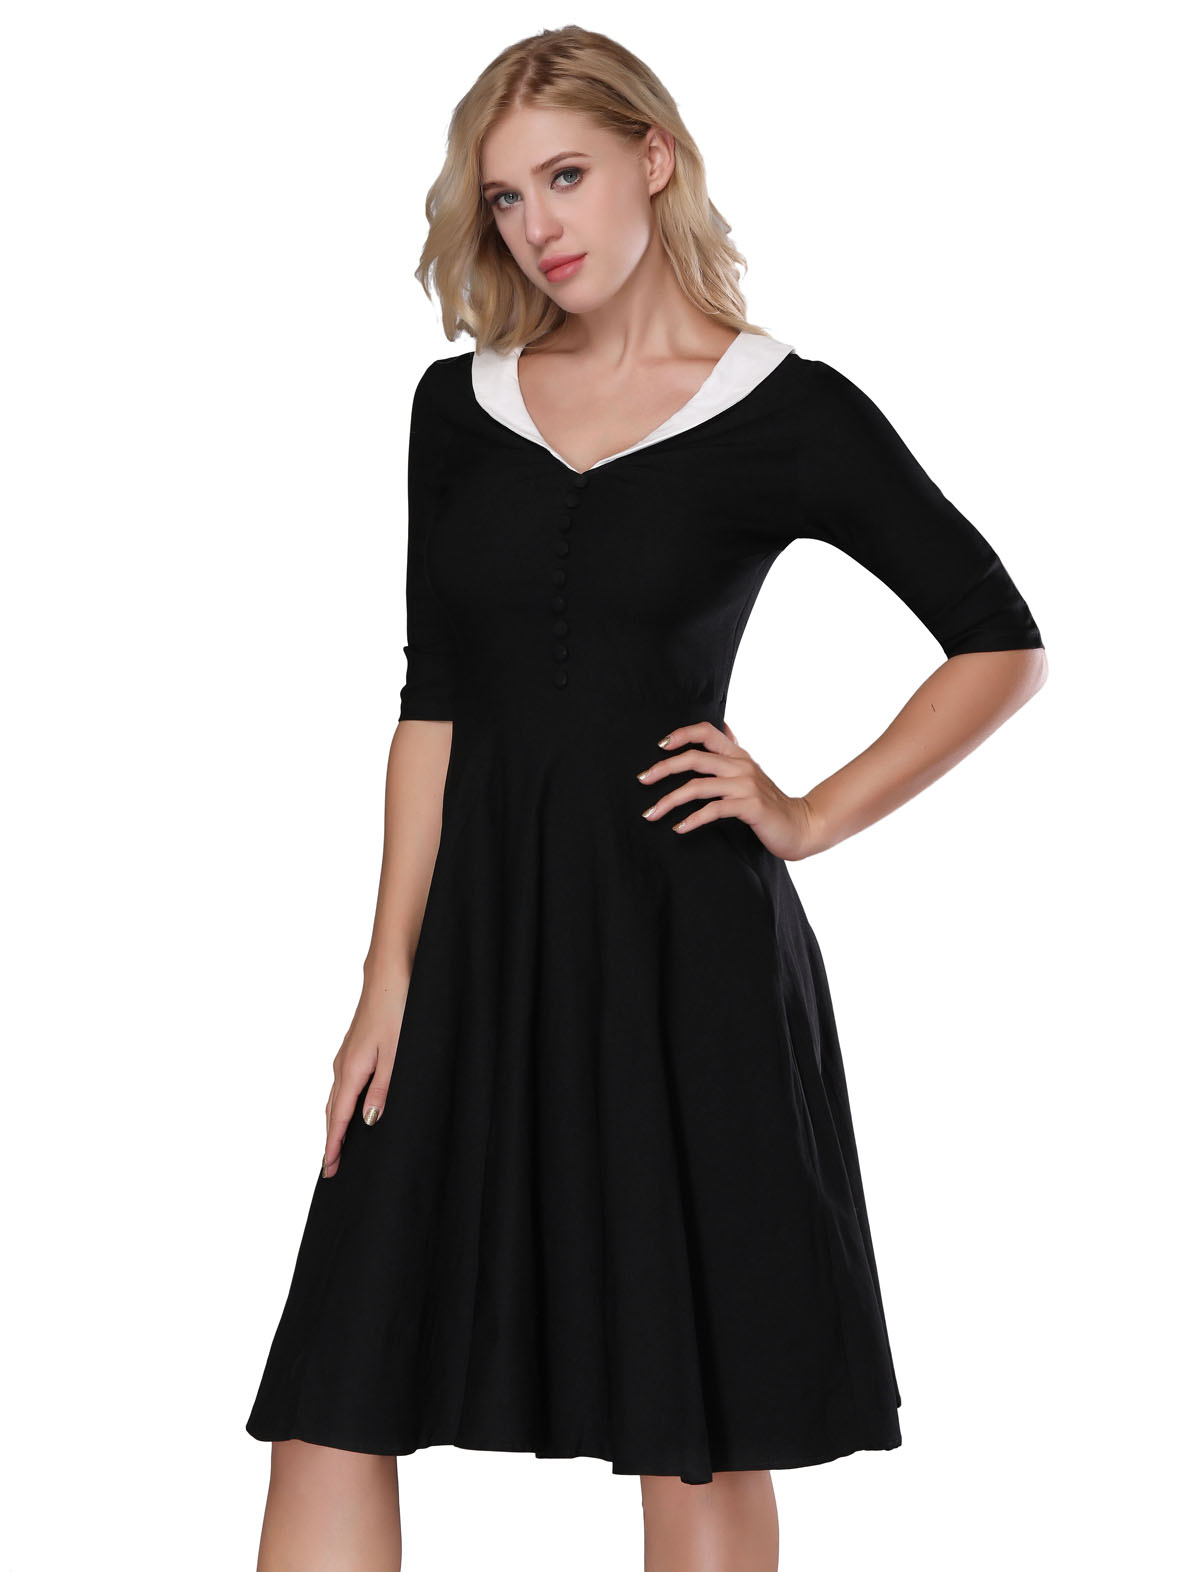 F2529-1 Womens  Vintage 1950s Cape Collar Swing Midi Cocktail Party Dresses